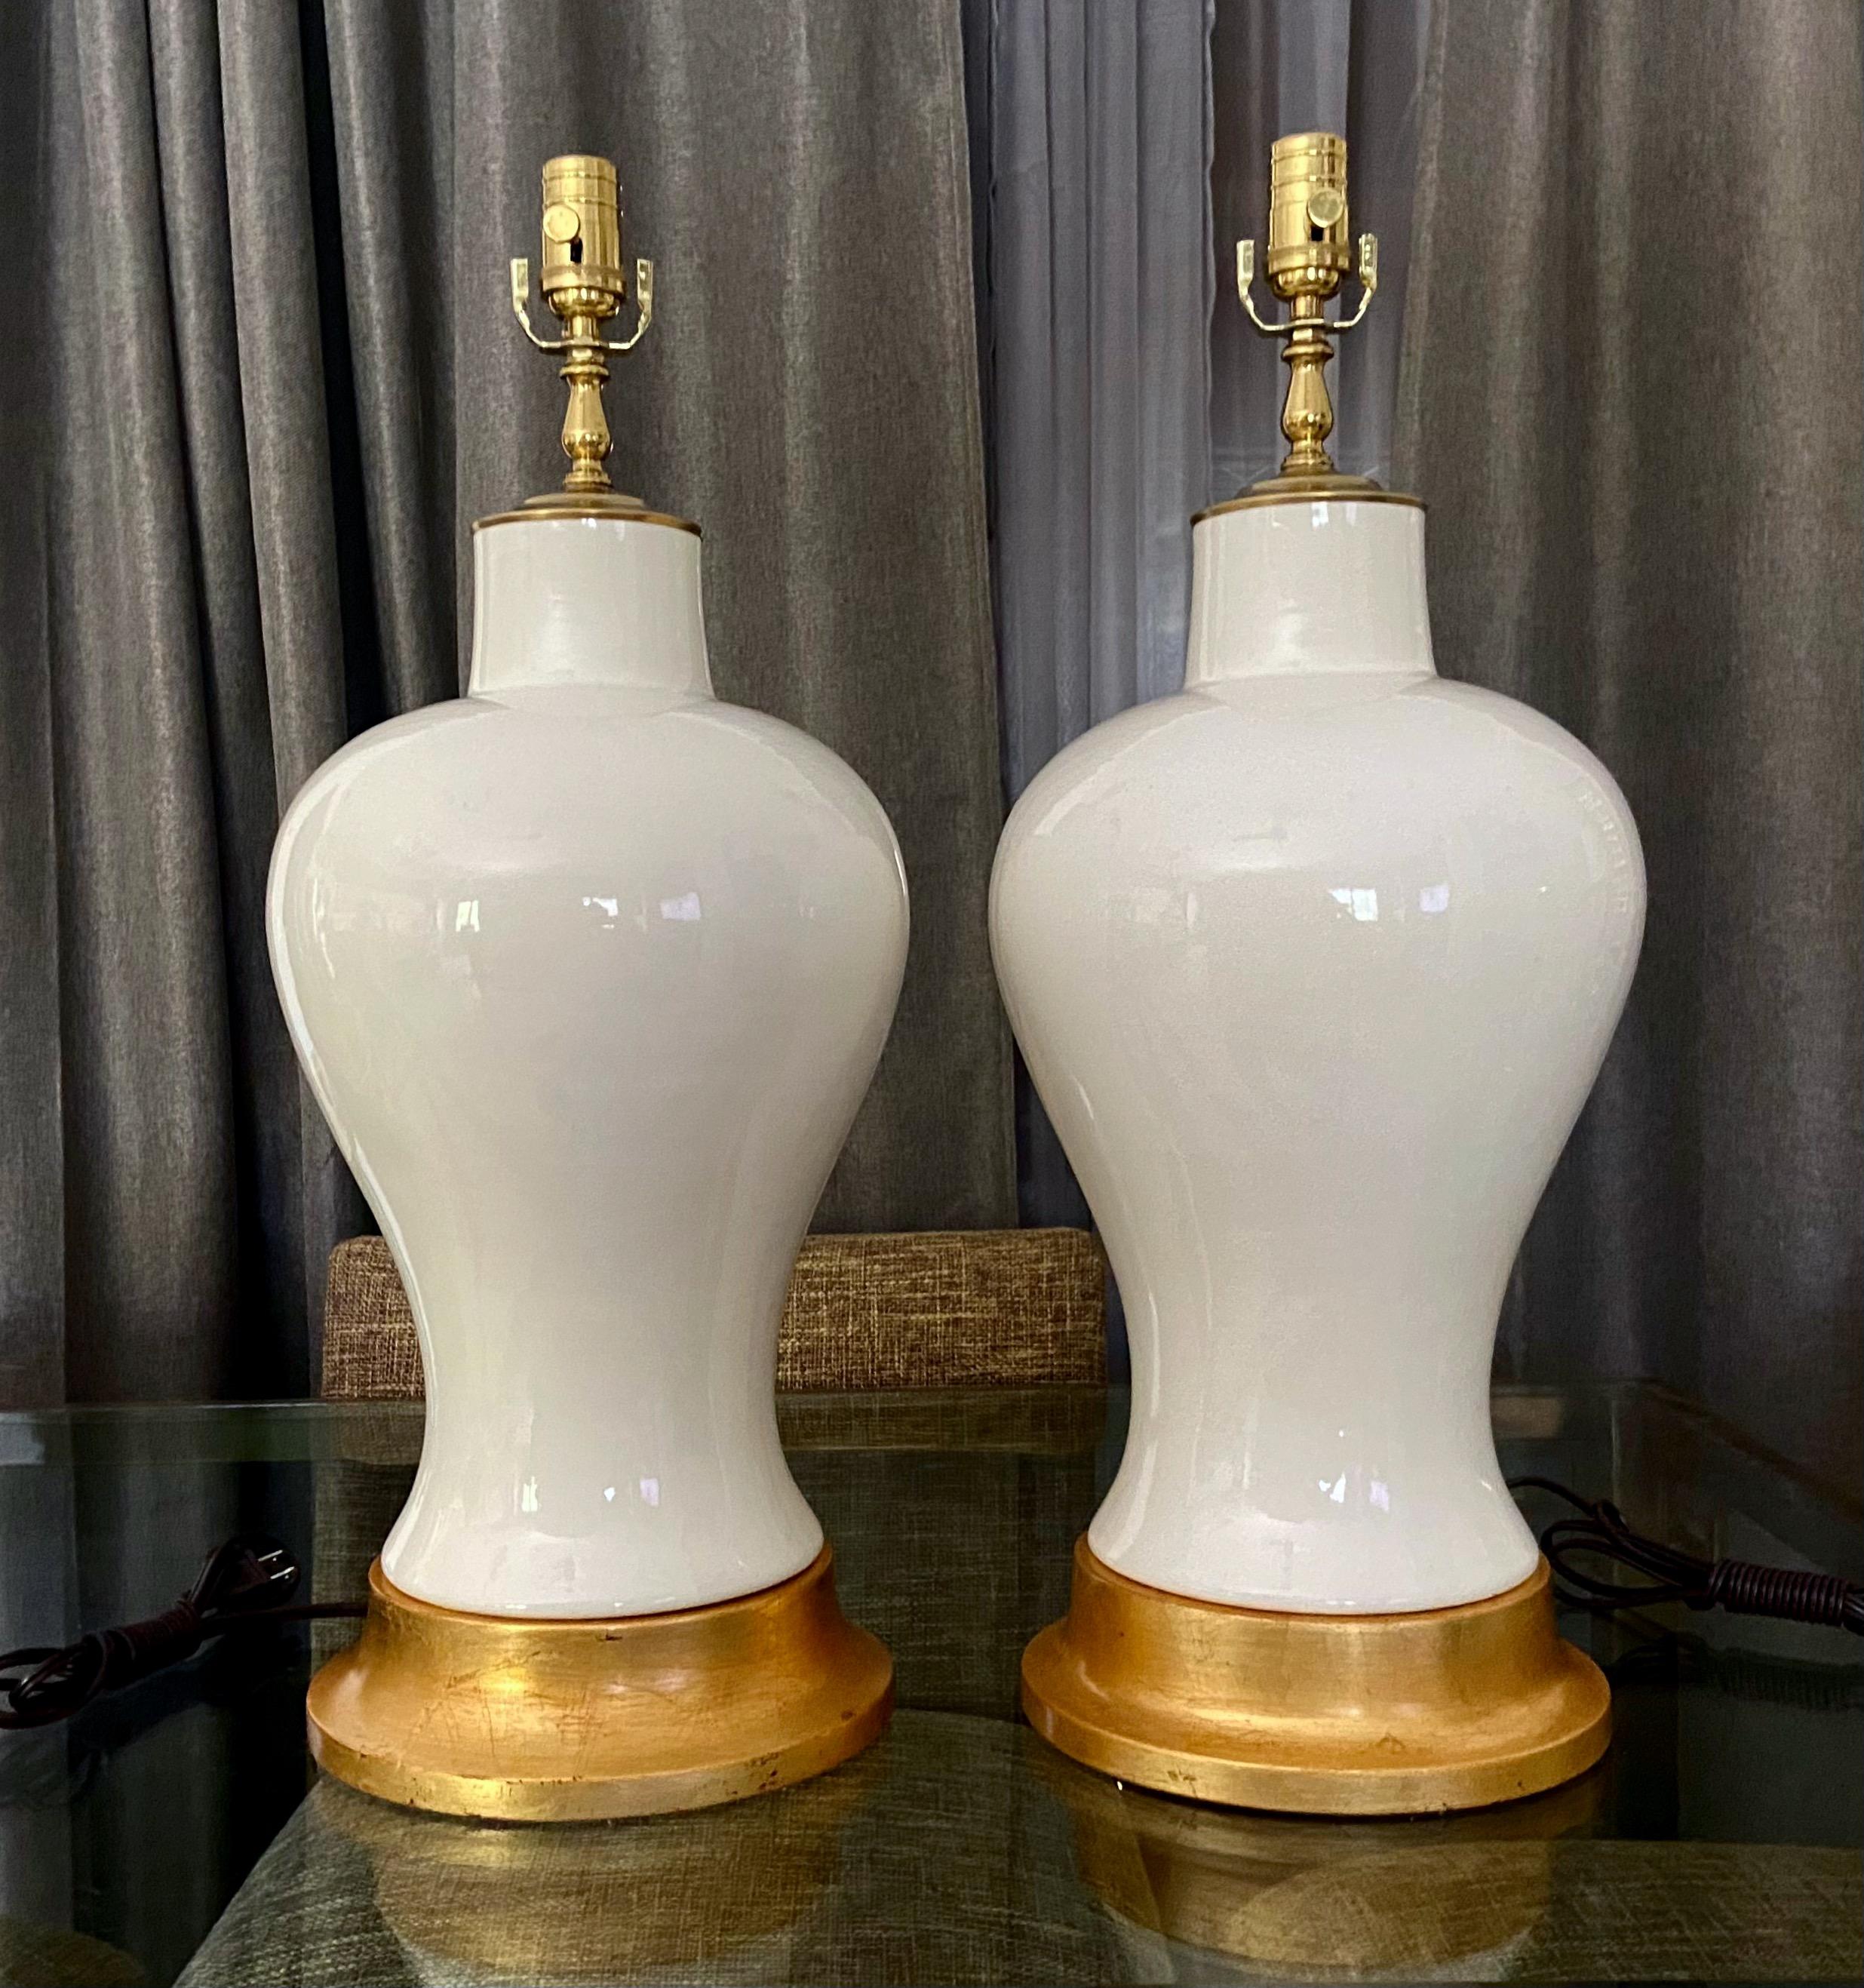 Pair of large white blanc de shine monochrome ginger jar shaped porcelain table lamps. Mounted on turned giltwood bases. Newly wired with new brass 3 way sockets and cords. Overall height top of socket 27